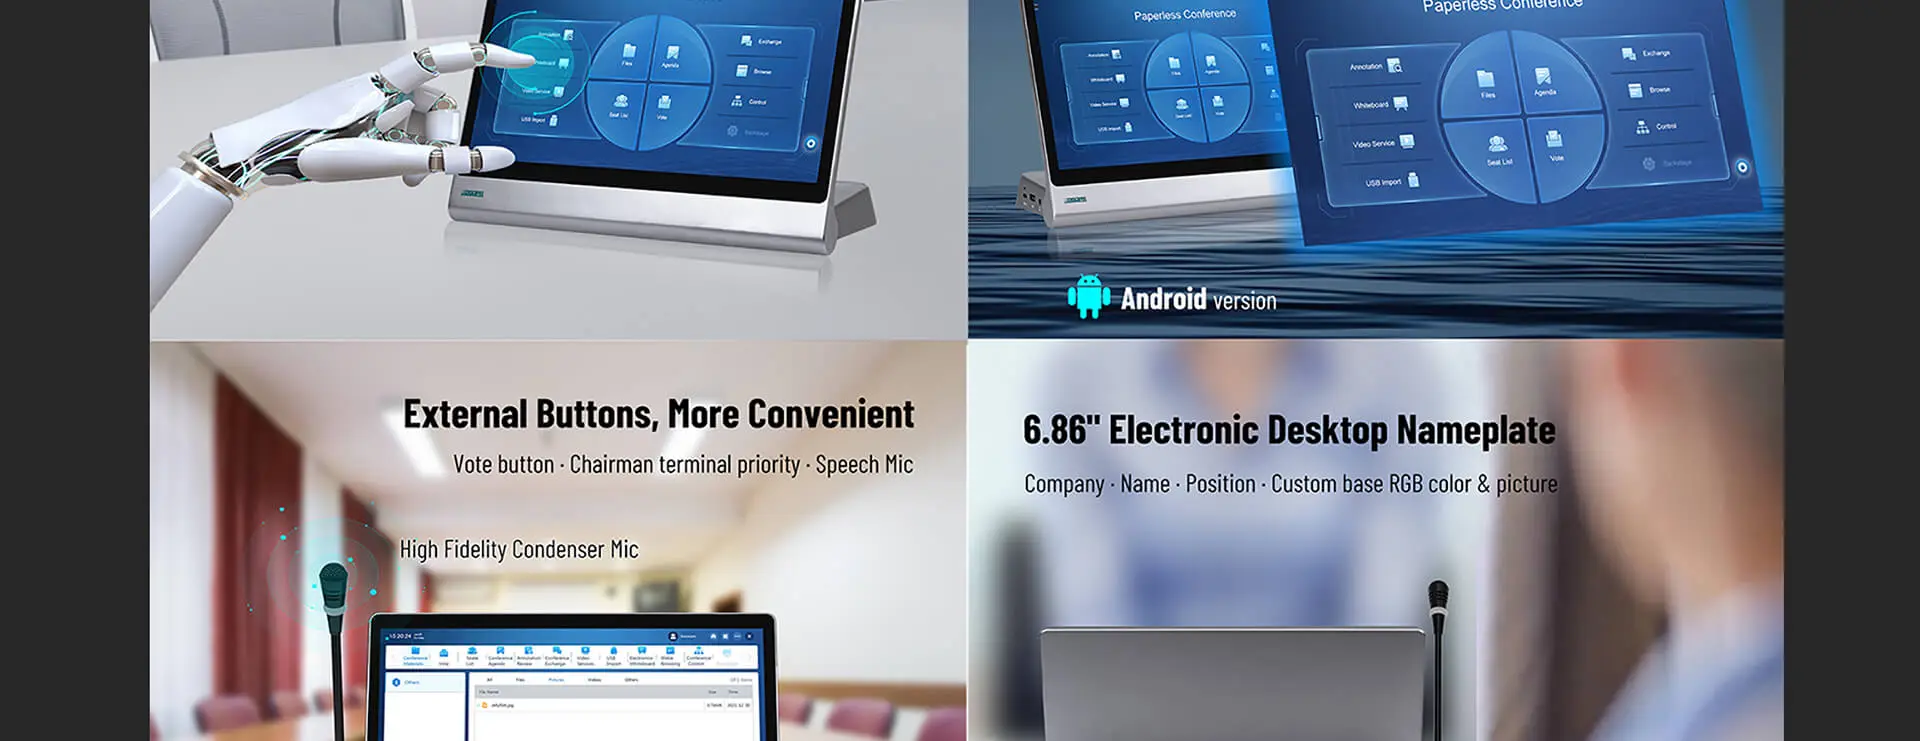 Desktop All-in-one Discussion Terminal with Mic & Nameplate